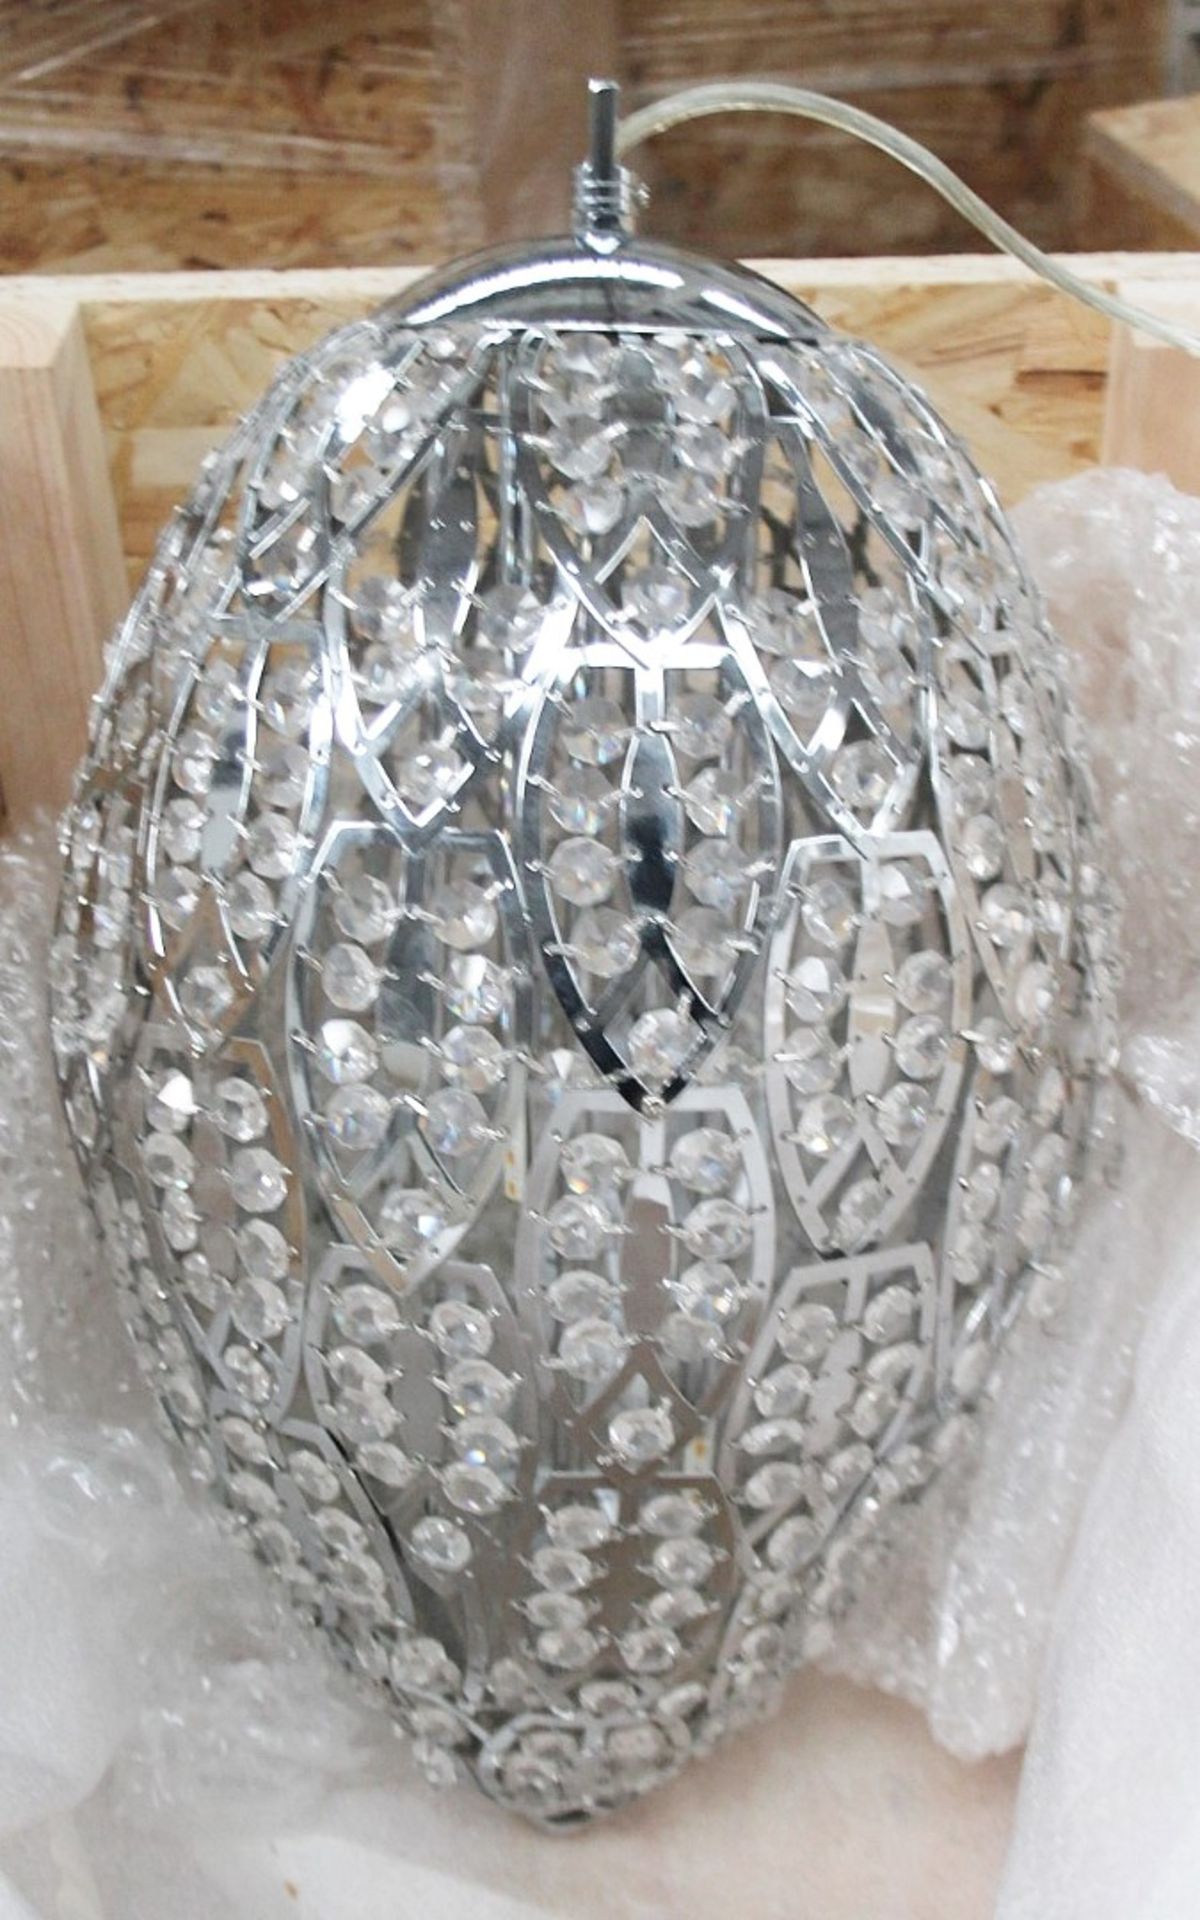 1 x High-end Italian LED Egg-Shaped Light Fitting Encrusted In Premium ASFOUR Crystal - RRP £4,000 - Image 4 of 9